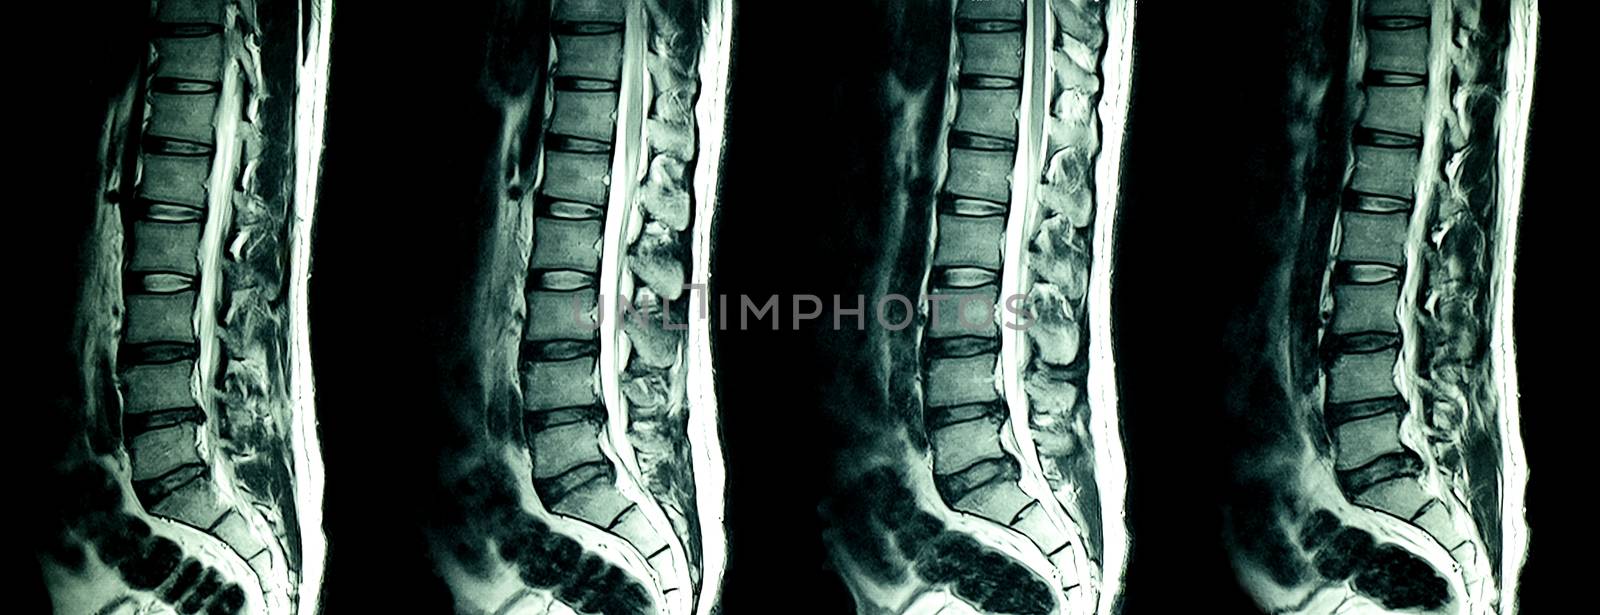 MRI scan of lumbar spines of a patient with chronic back pain by Nawoot